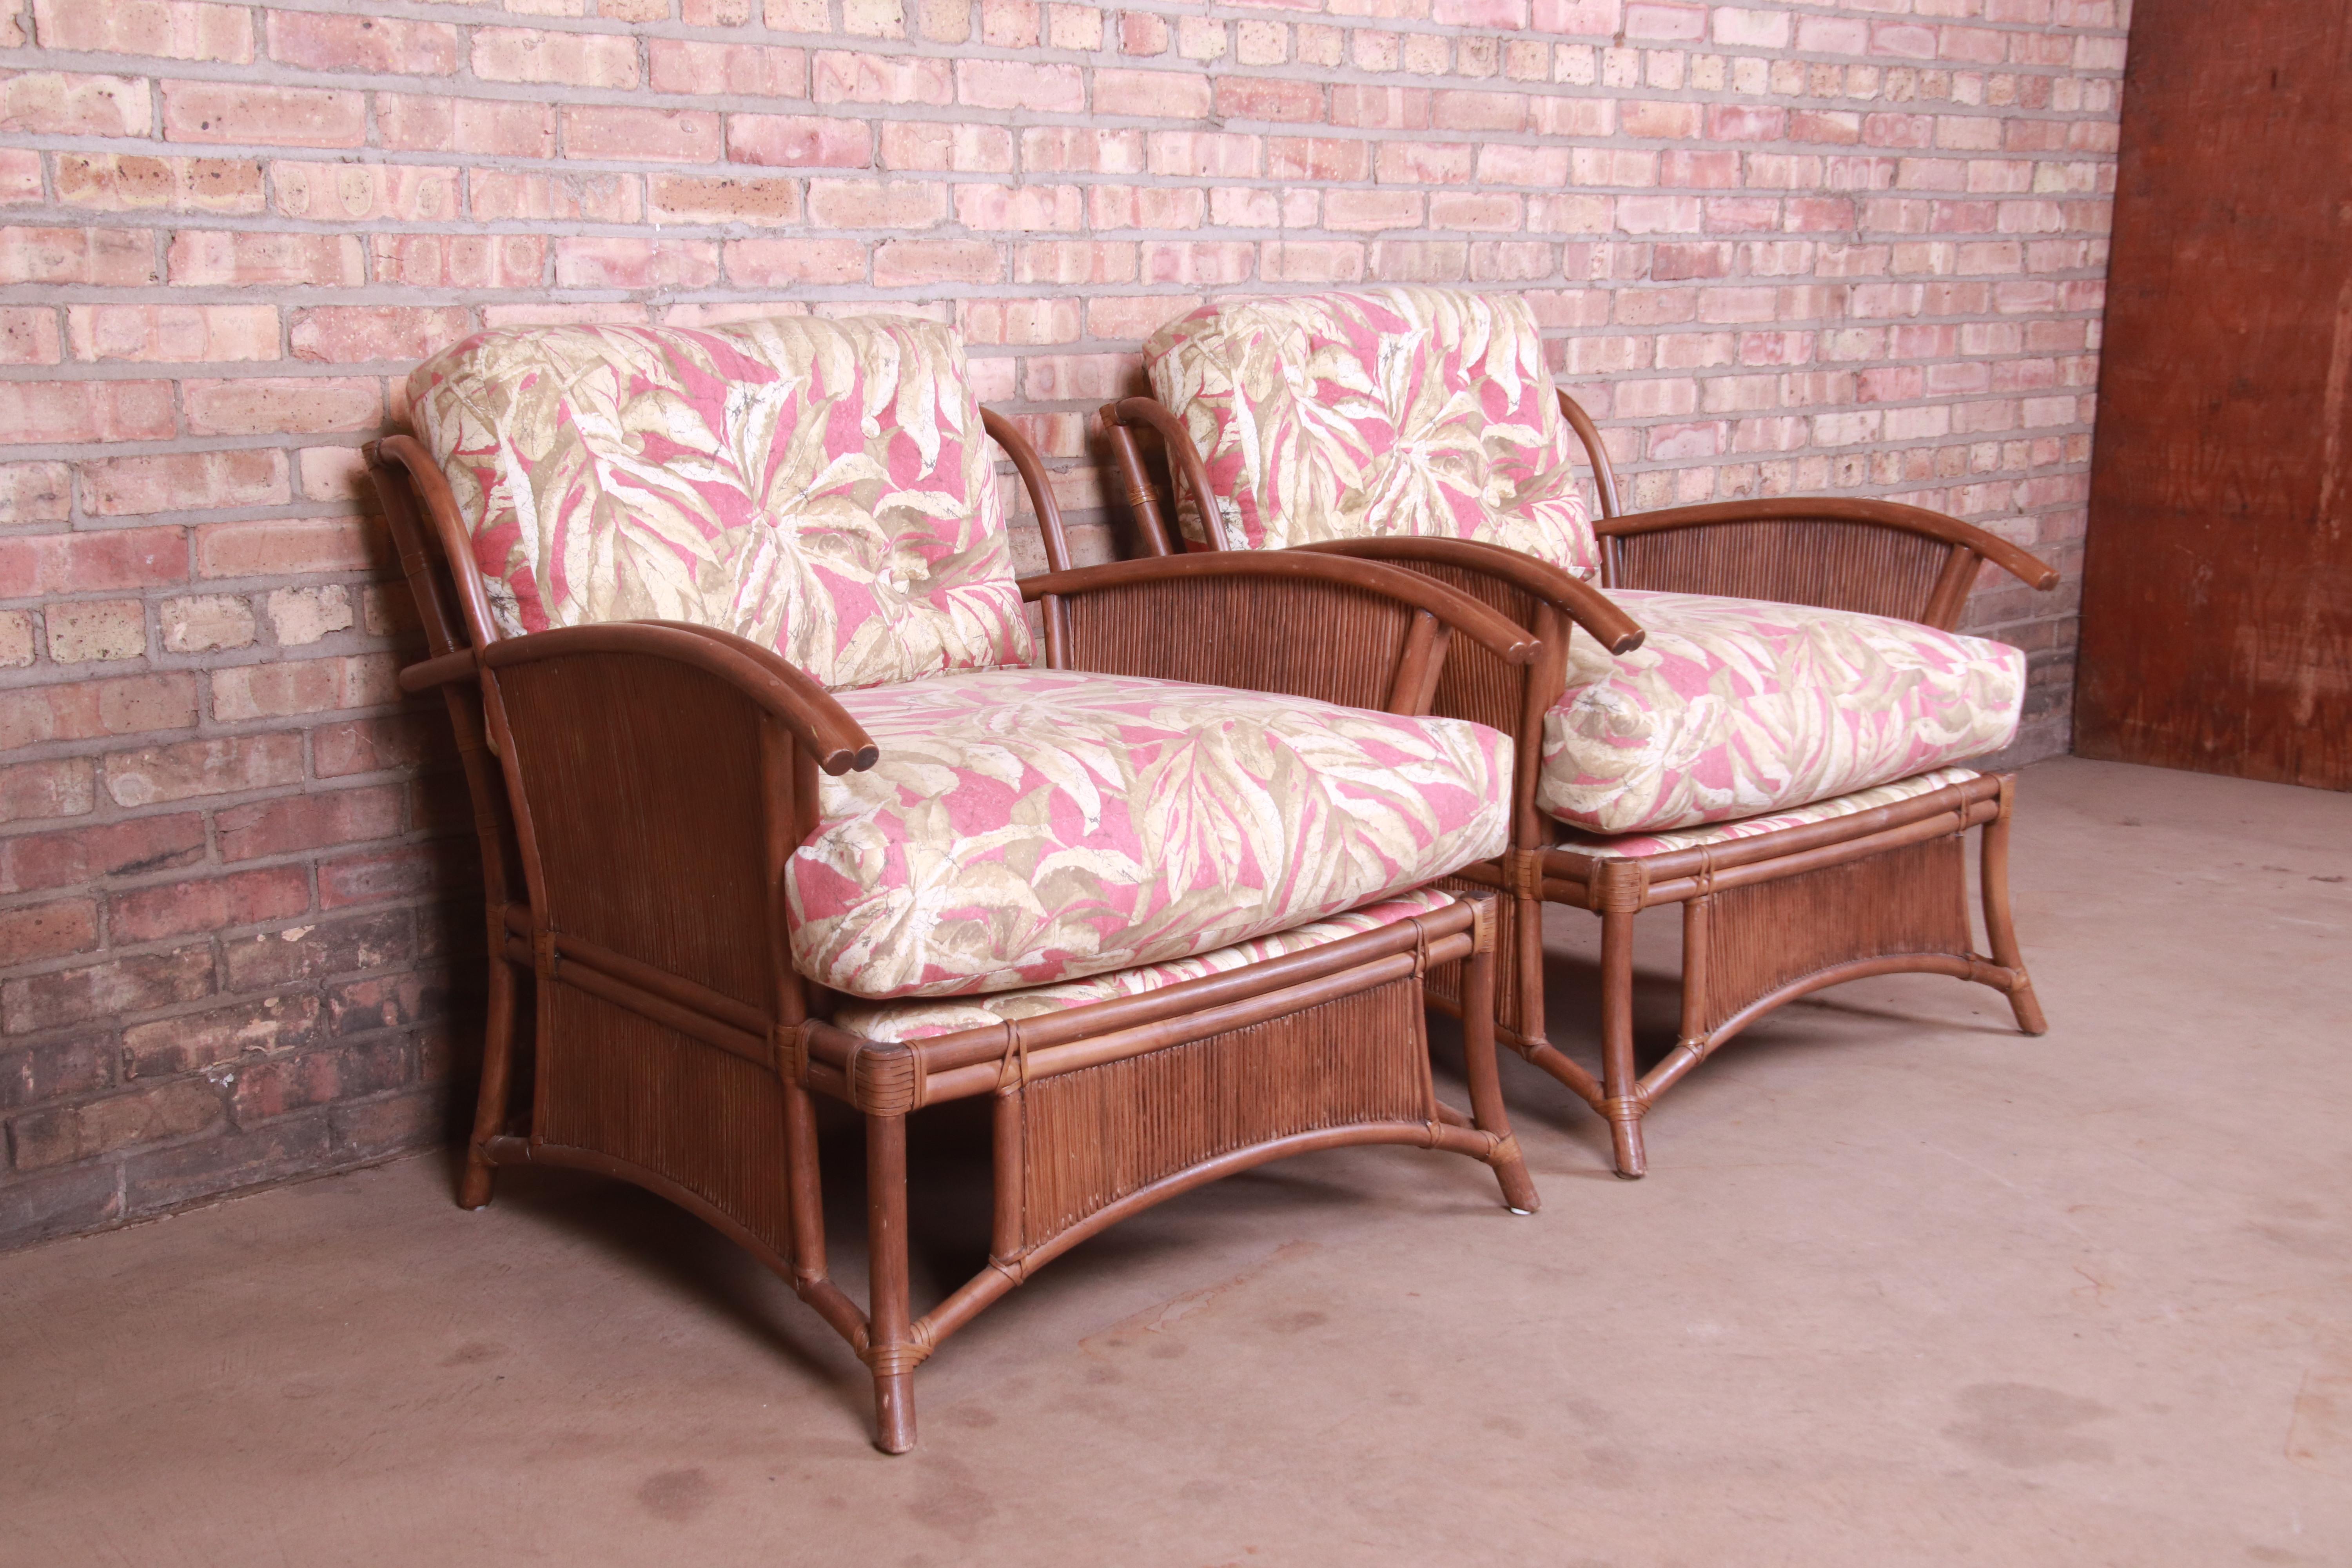 Upholstery Ficks Reed Hollywood Regency Bamboo Rattan Lounge Chairs, Pair